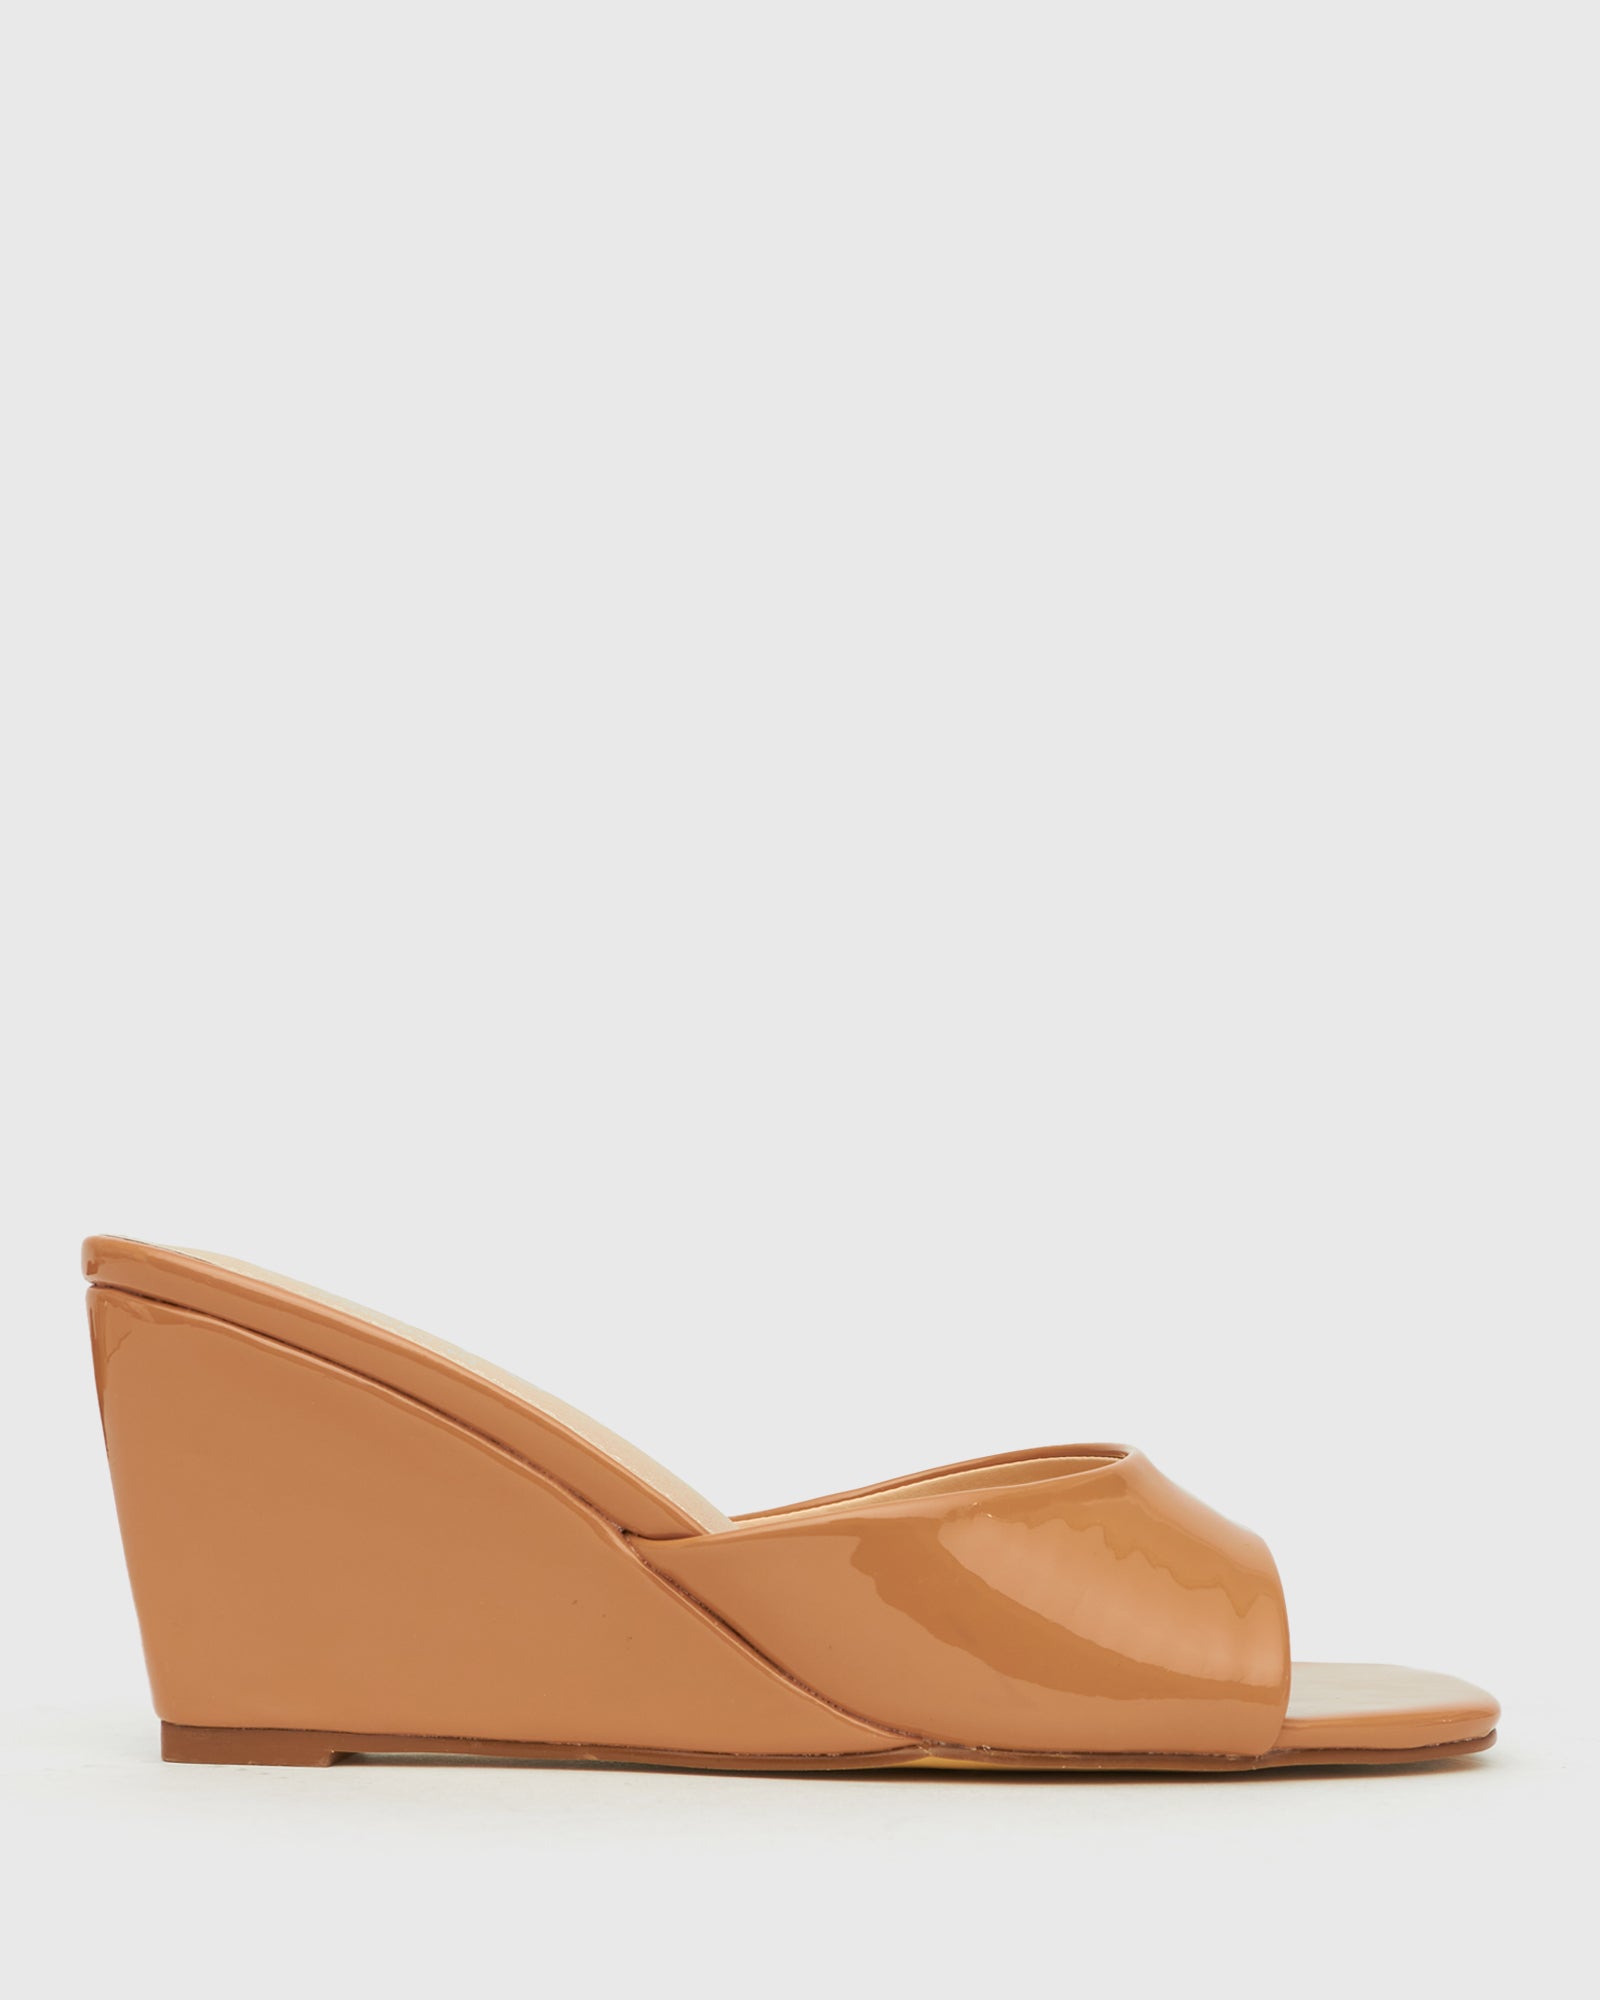 Buy DARLING Low Wedge Dress Sandals by Betts online - Betts